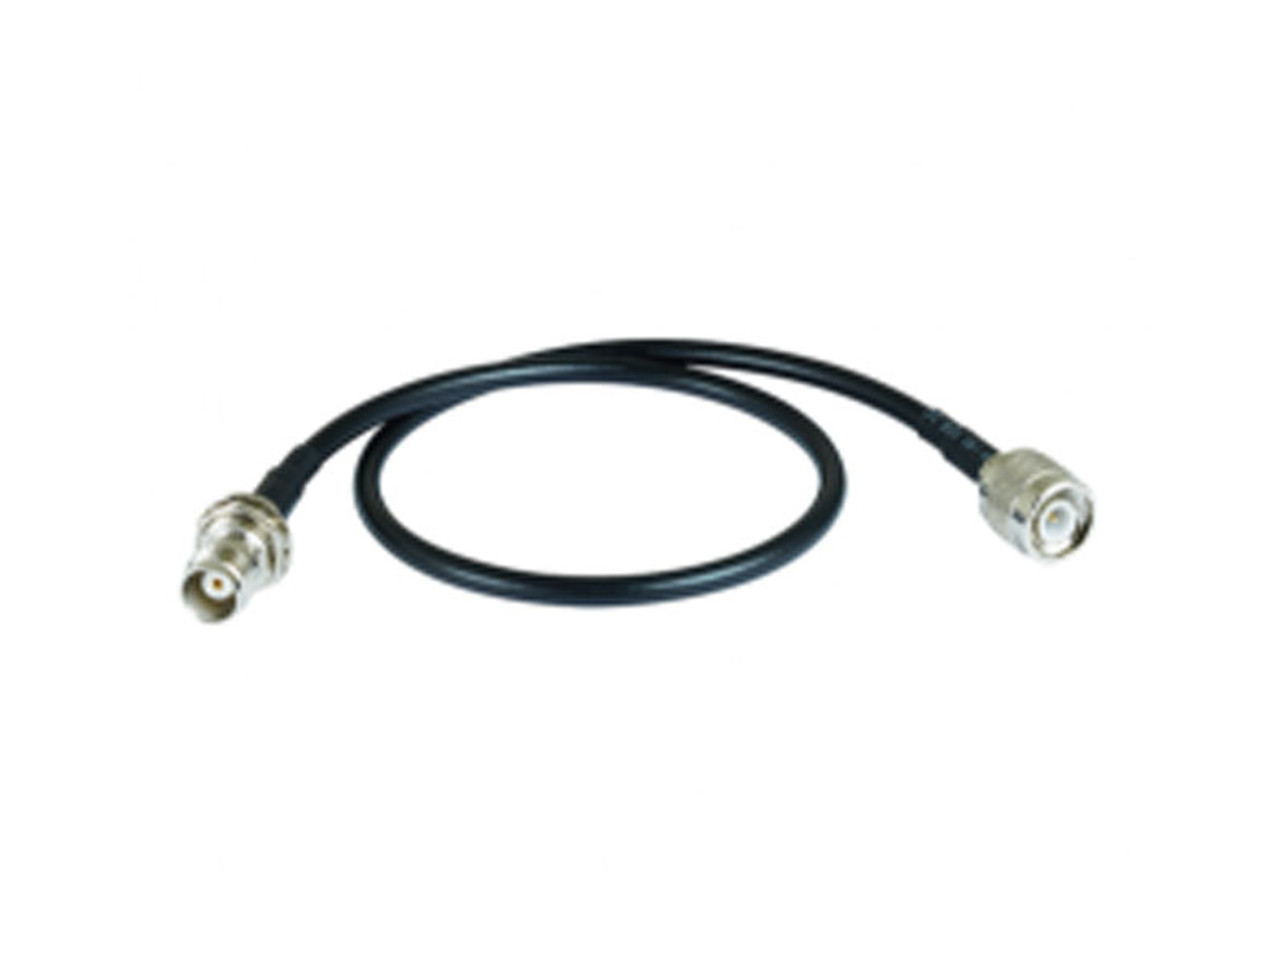 Avlex FBC-72 Rear-To-Front Antenna Cables For Transmitters 